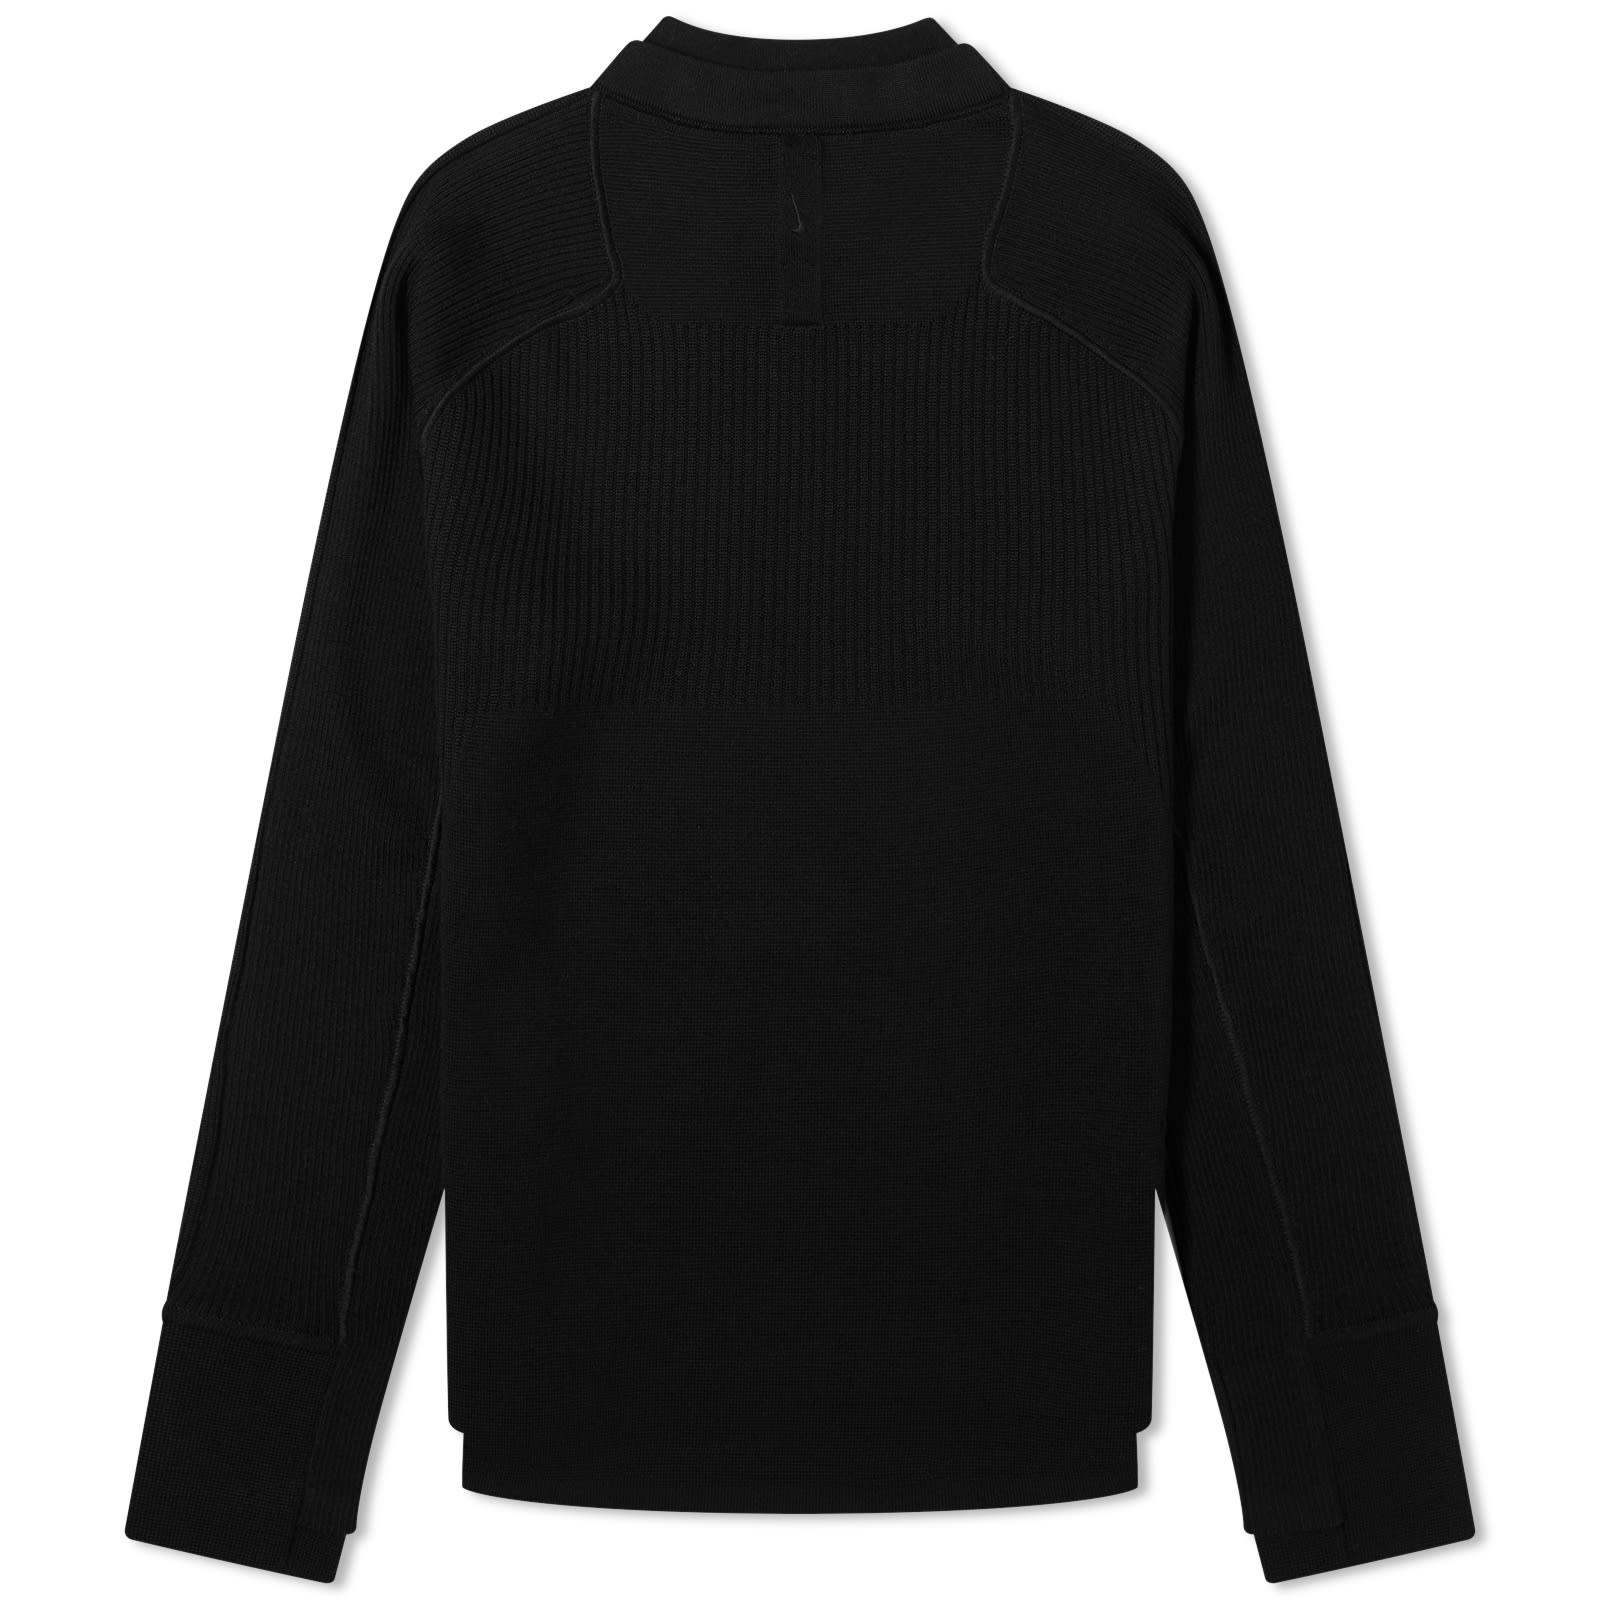 Nike Every Stitch Considered Long Sleeve Knit - 2